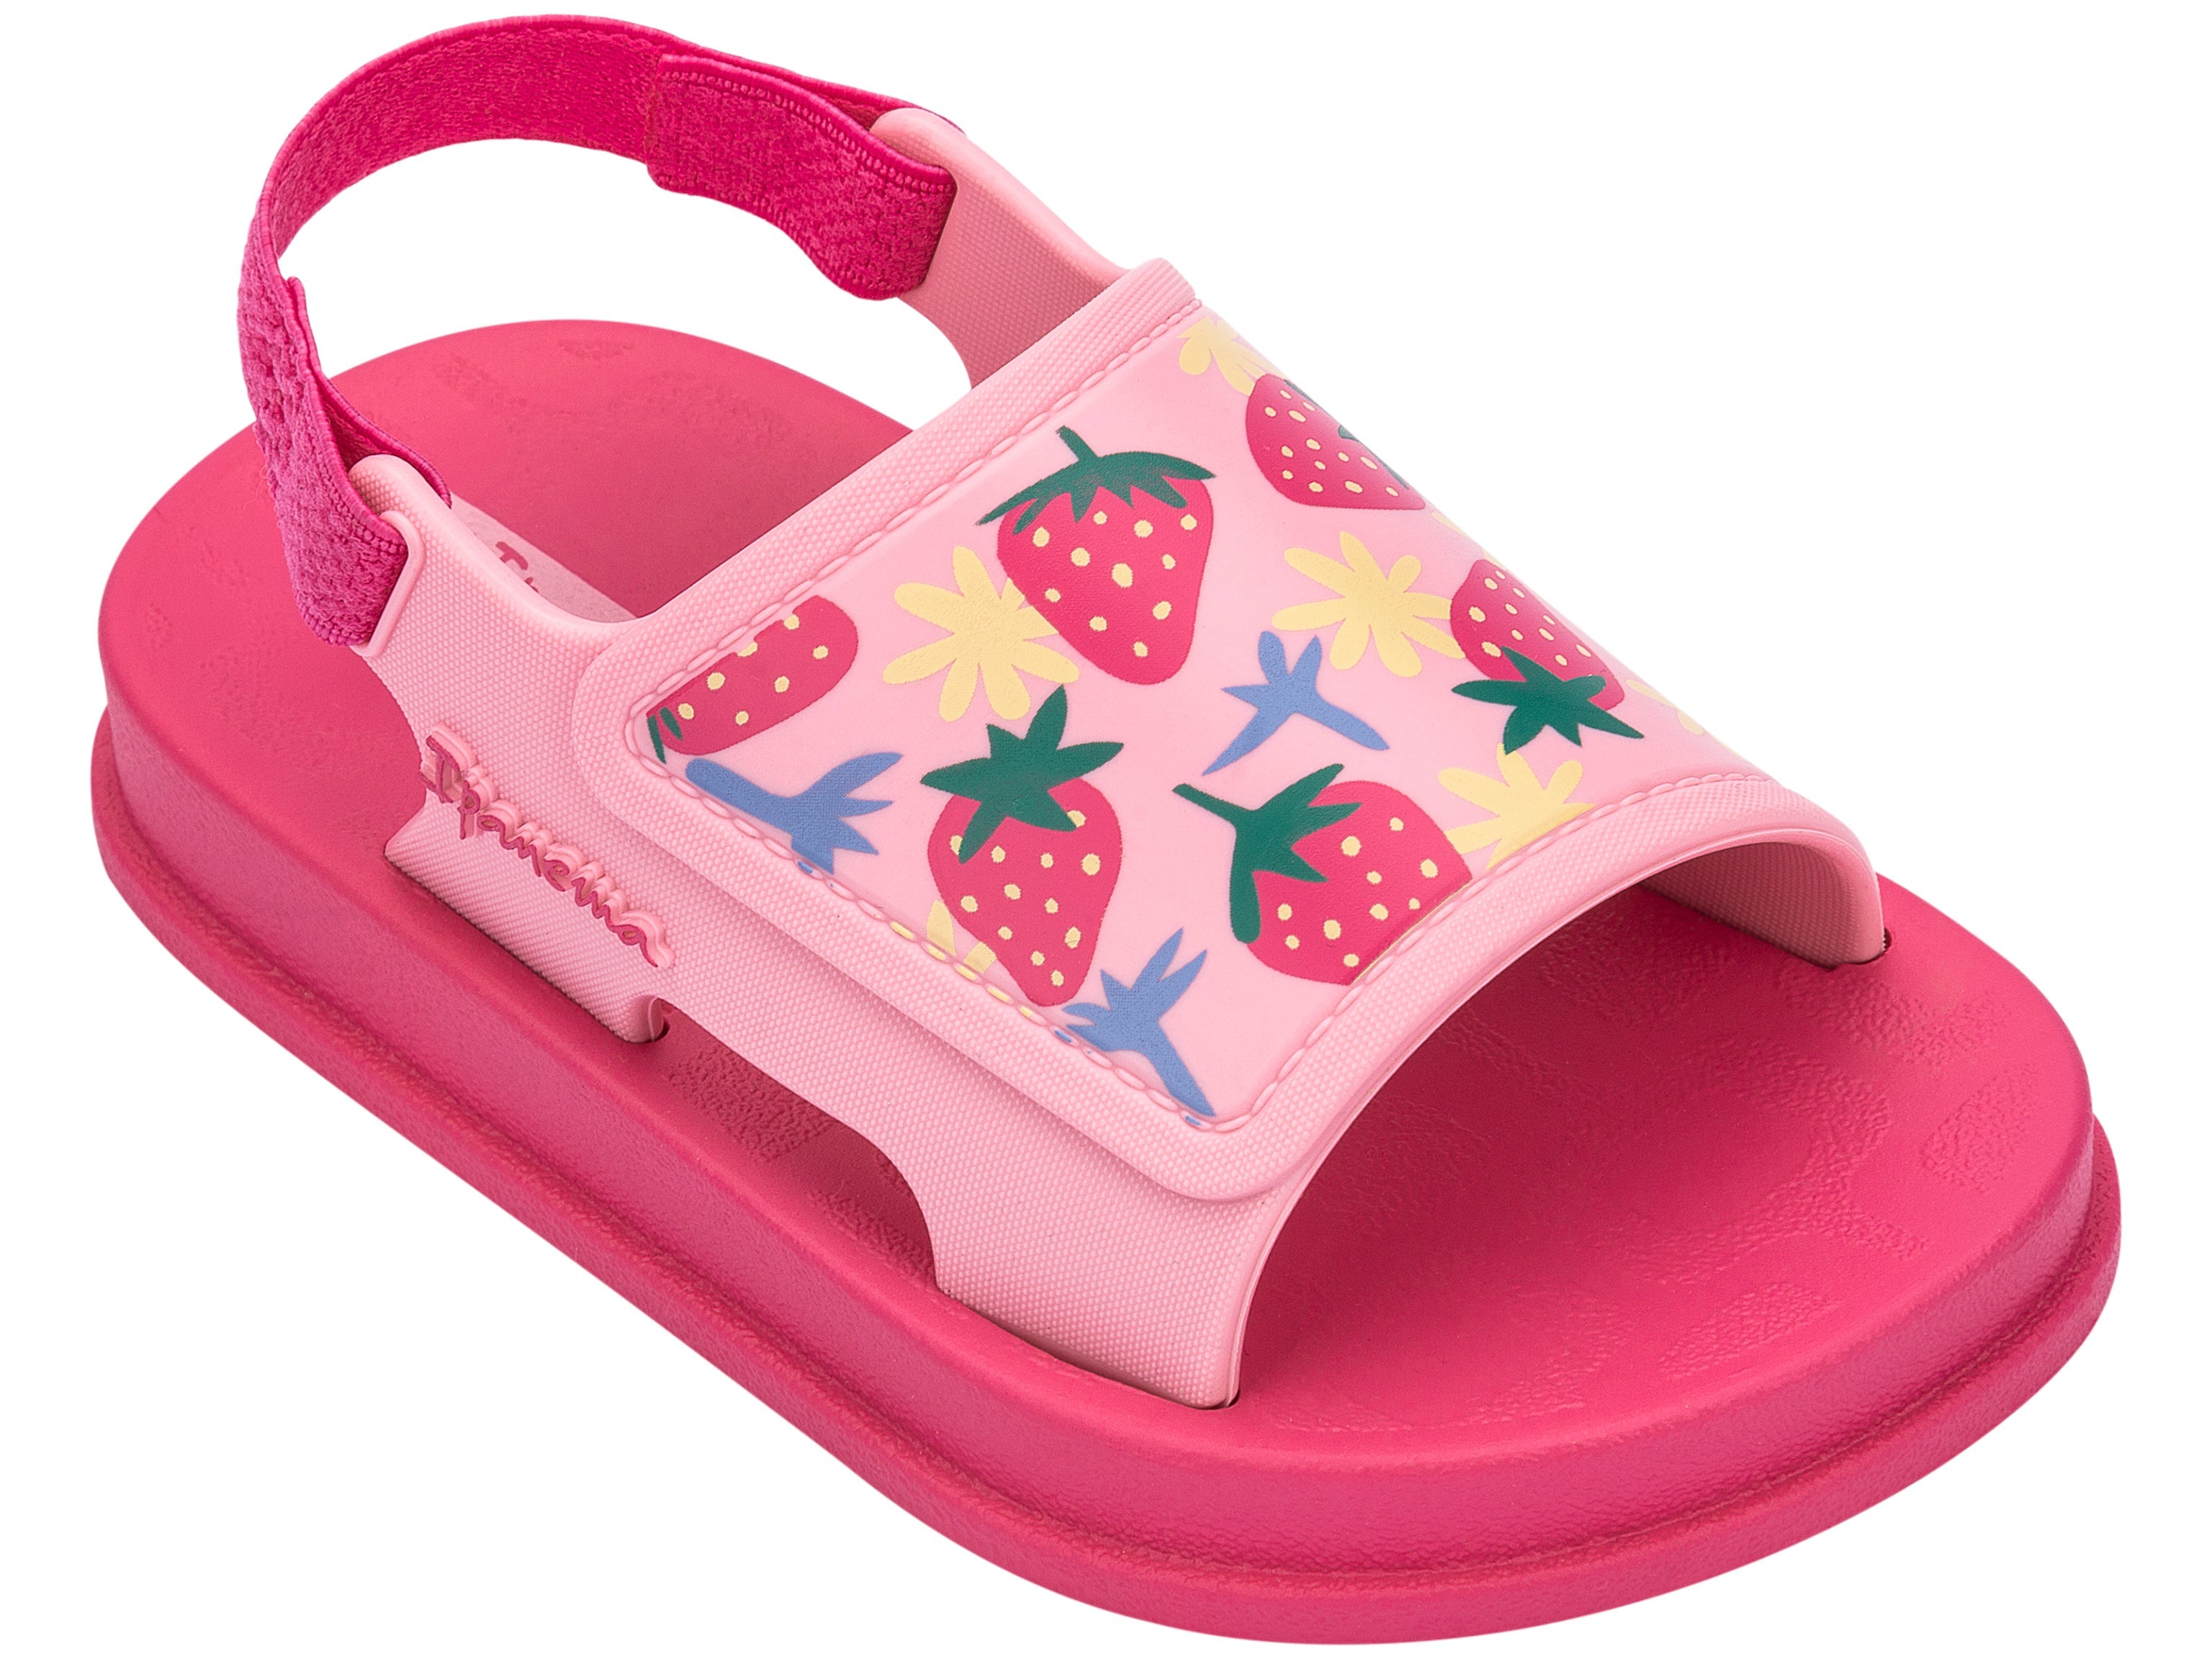 Angled view of a pink Ipanema Soft baby sandal with fruit print on the upper.